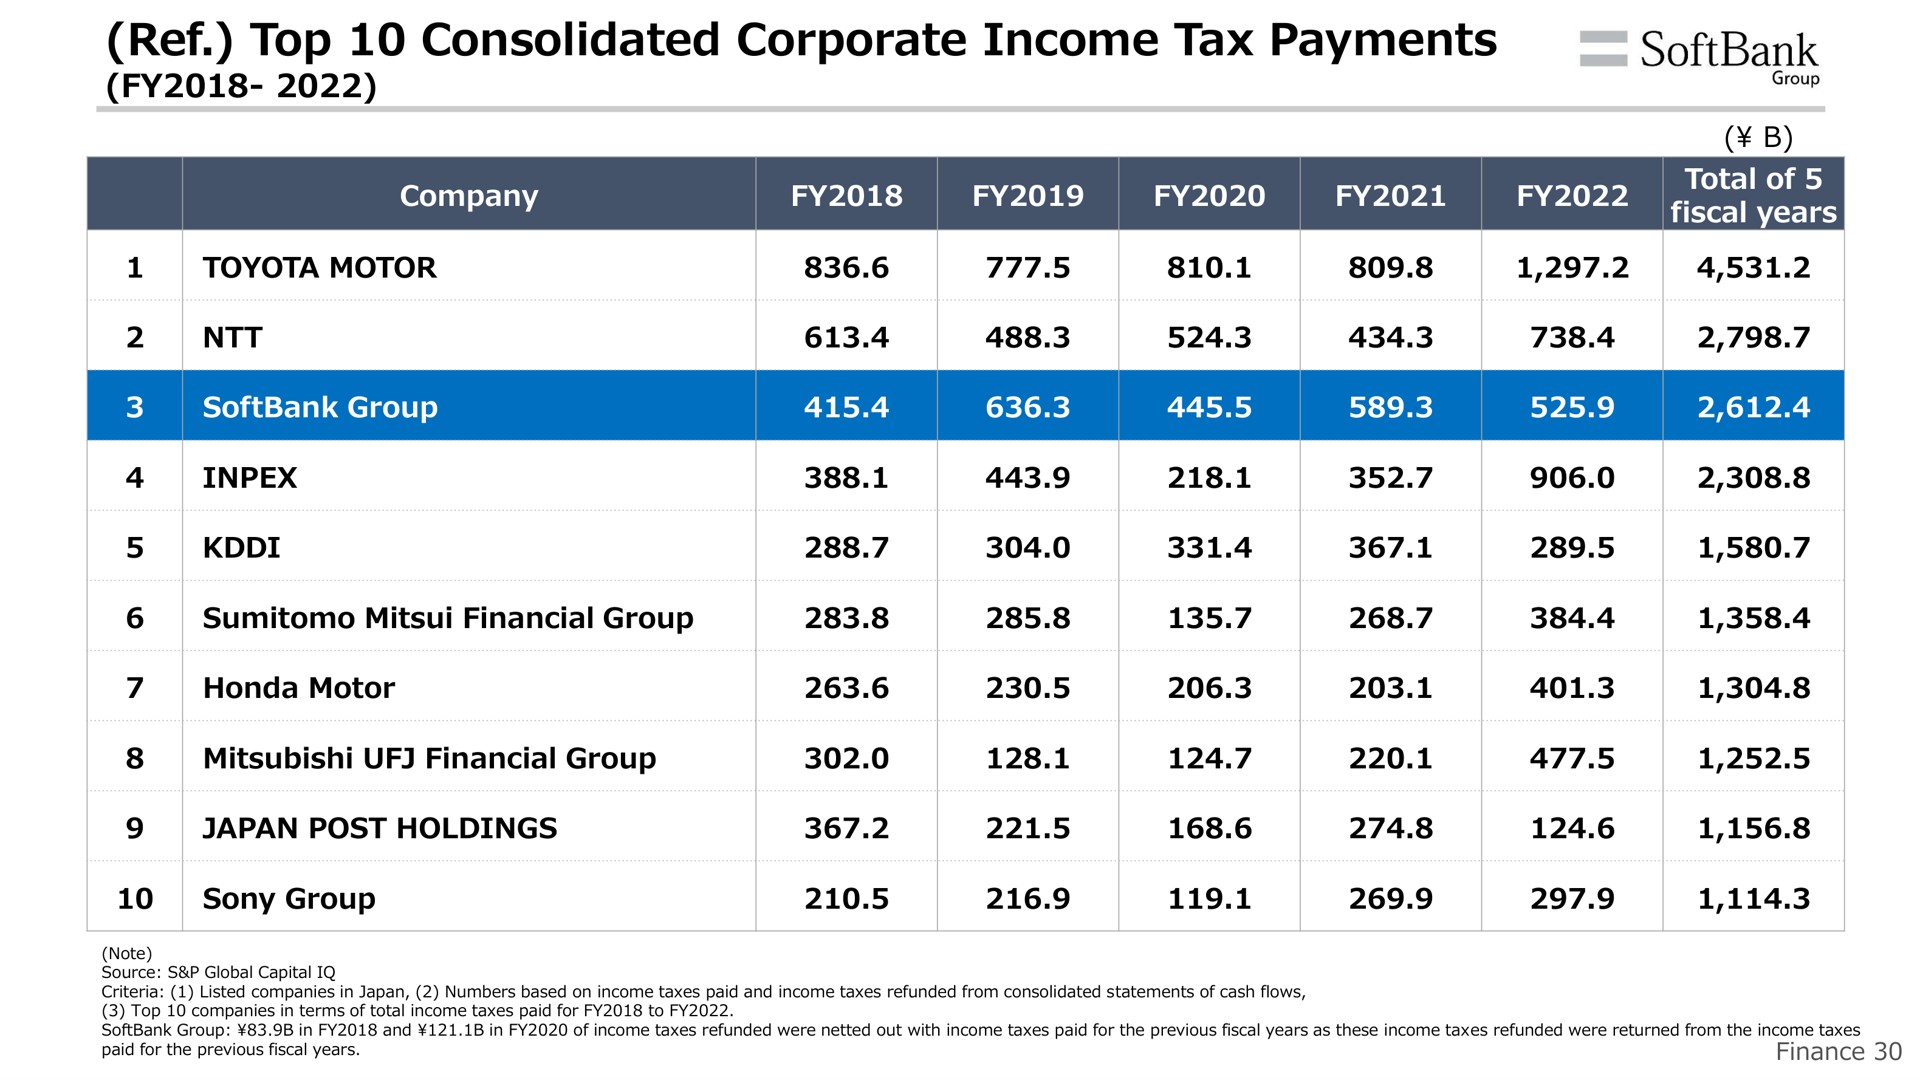 ref top consolidated corporate income tax payments on tan pst me me plot | SoftBank